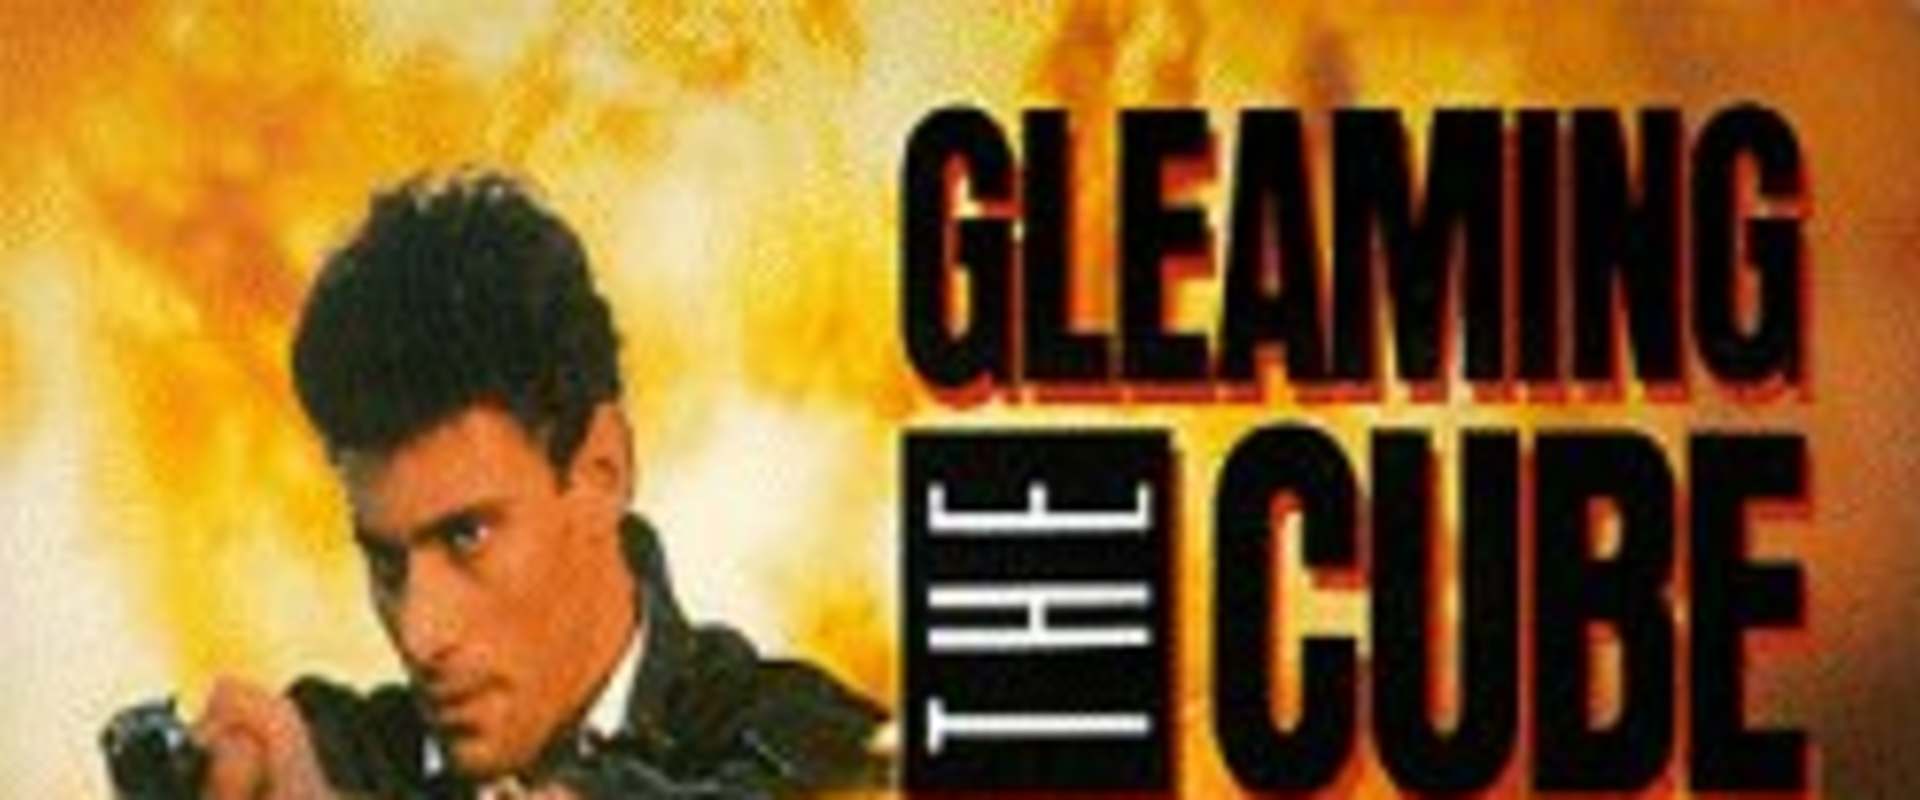 Gleaming the Cube background 1